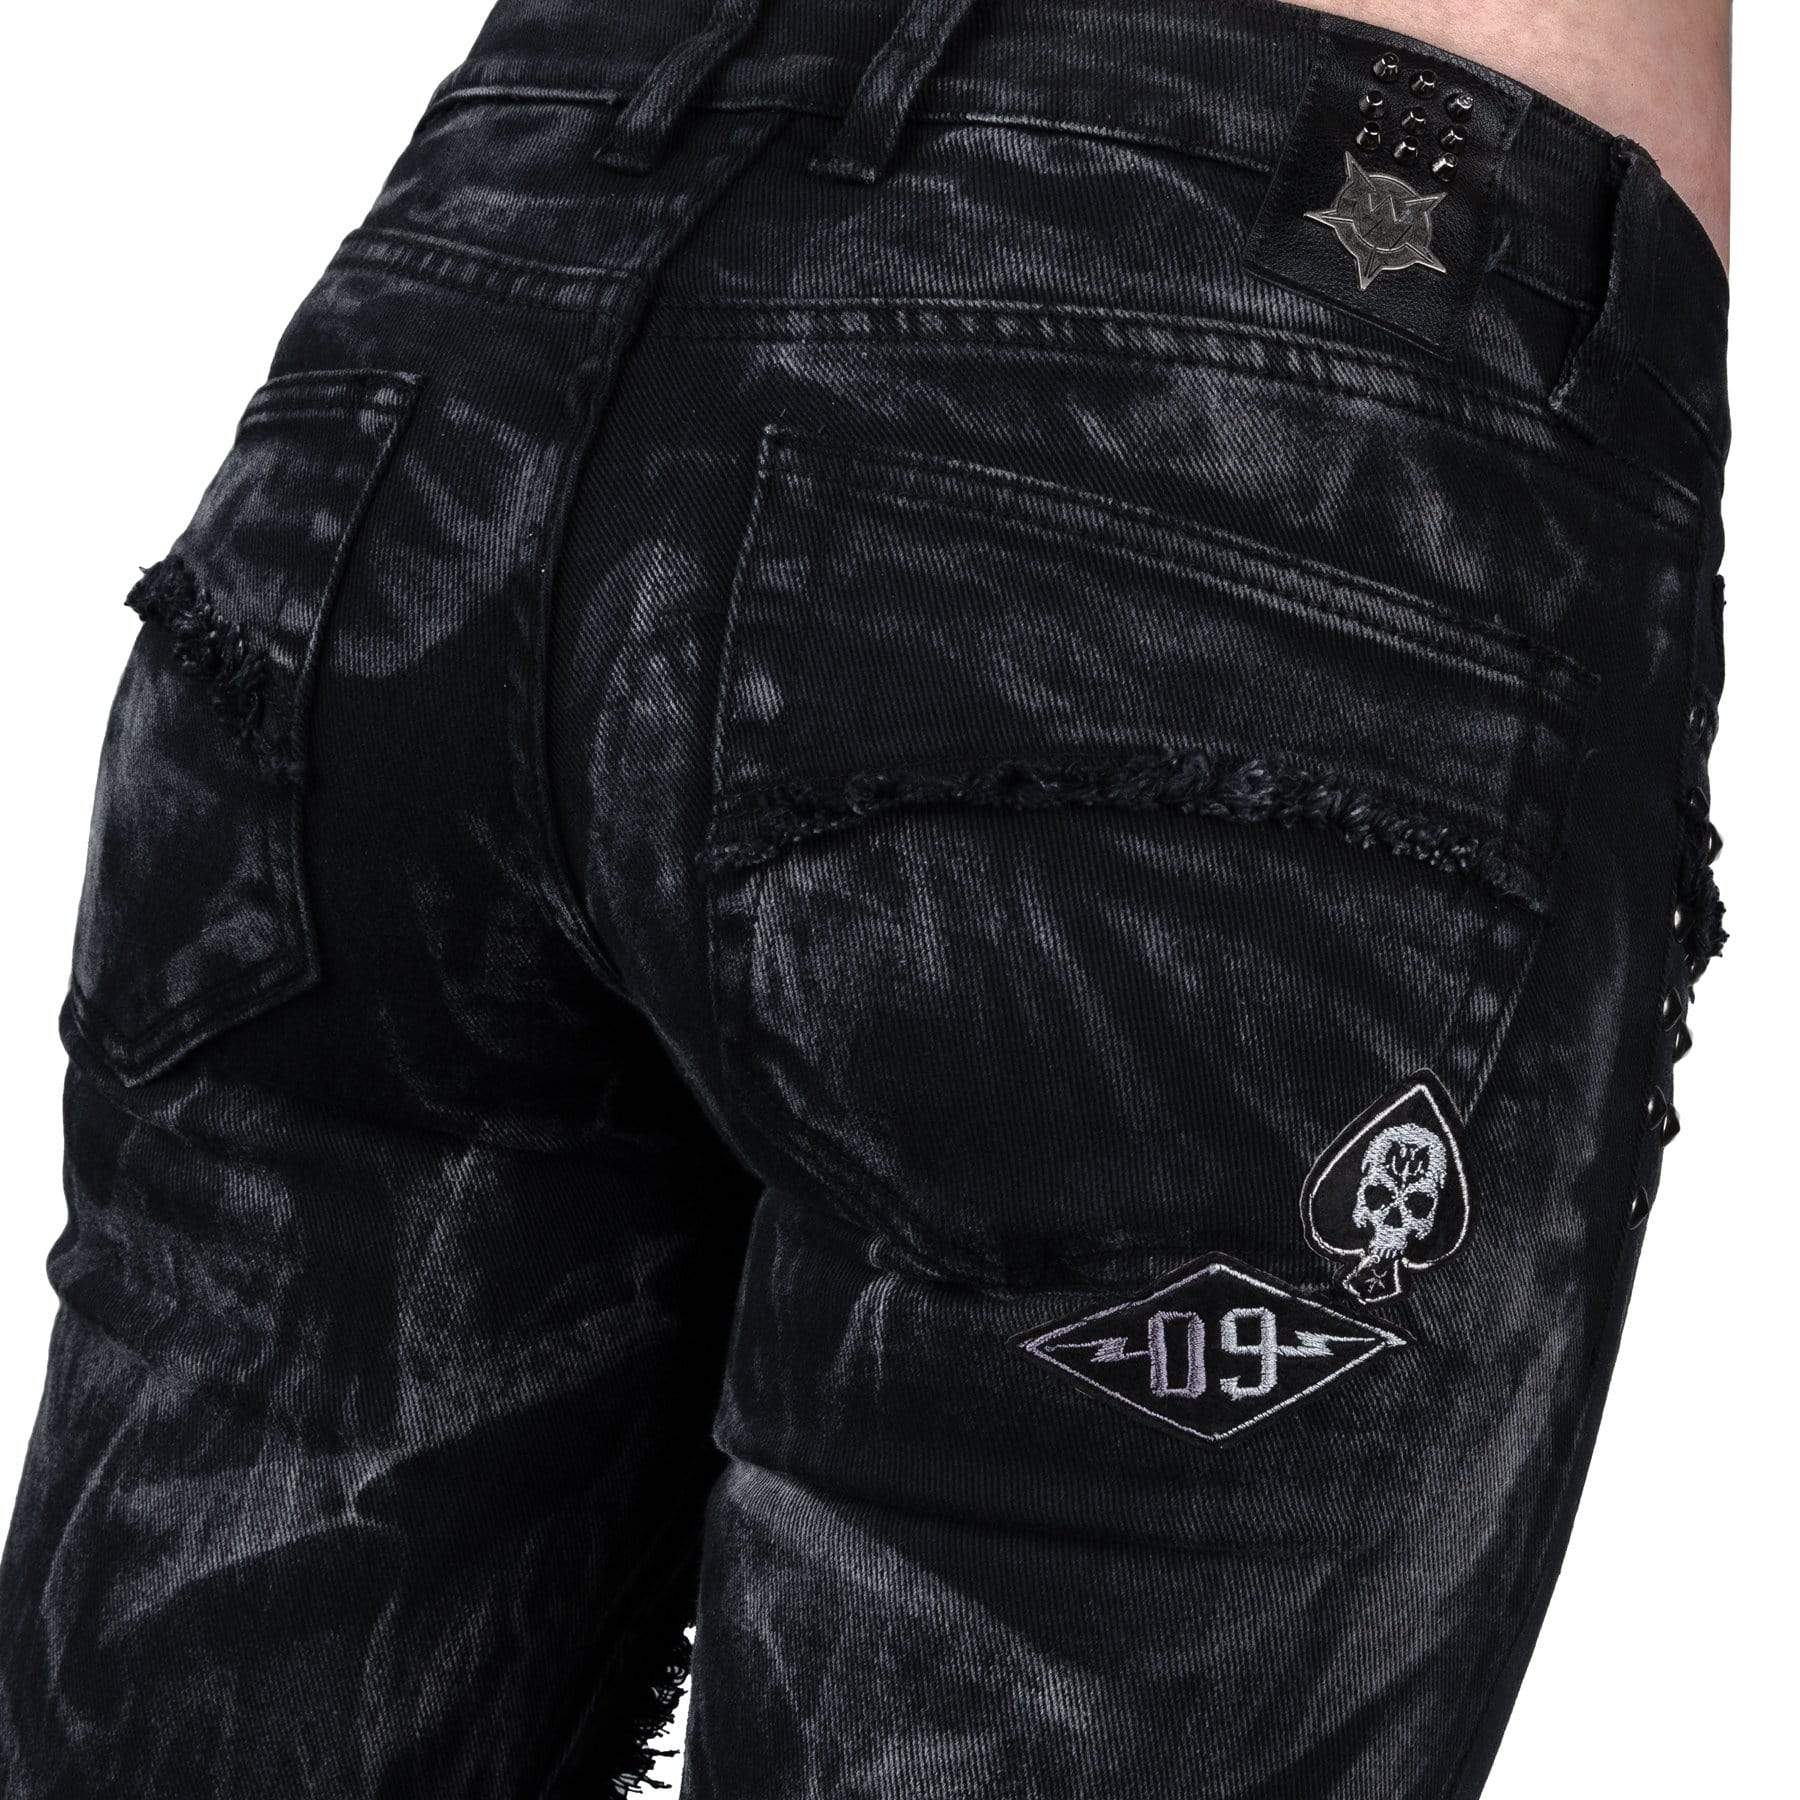 All Access Collection Pants Cutlass Unisex Jeans